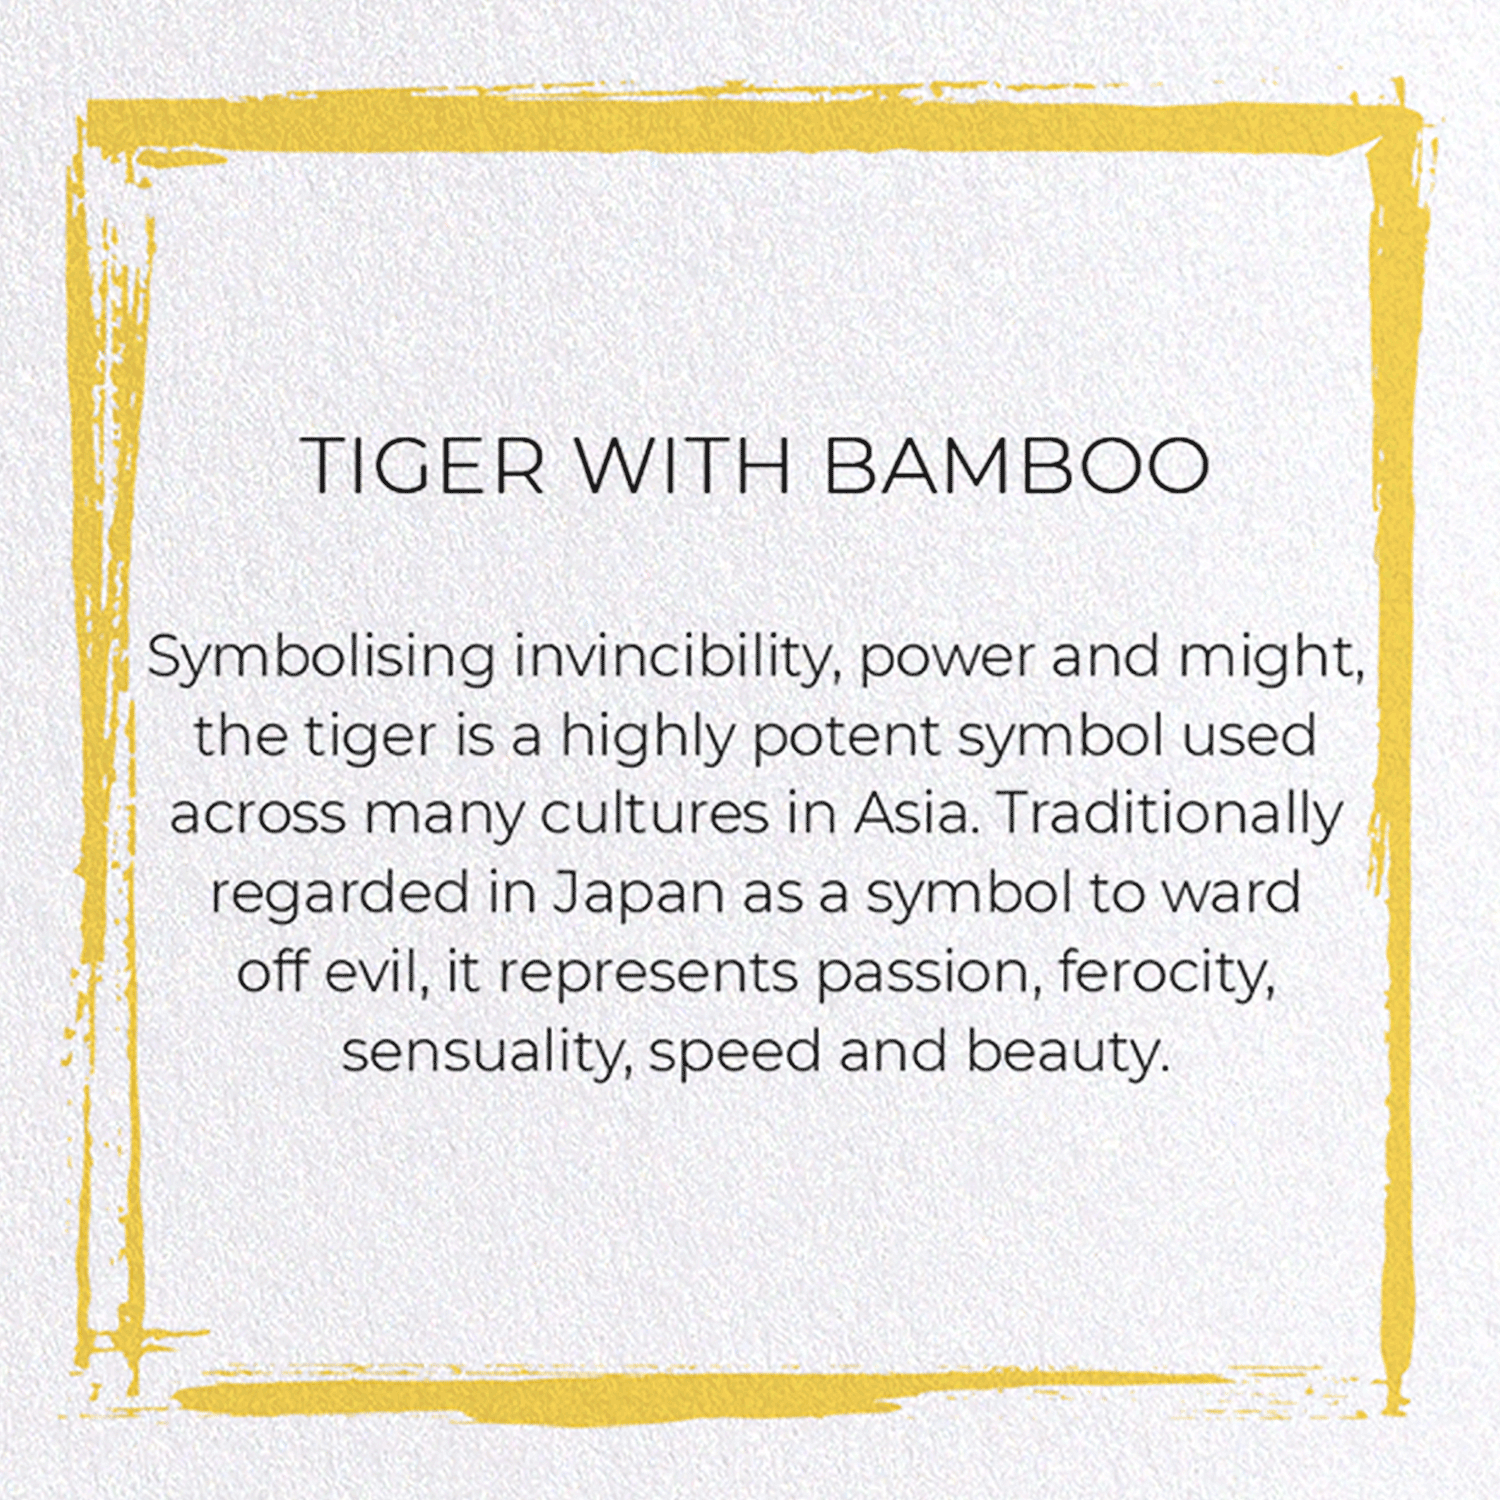 TIGER WITH BAMBOO